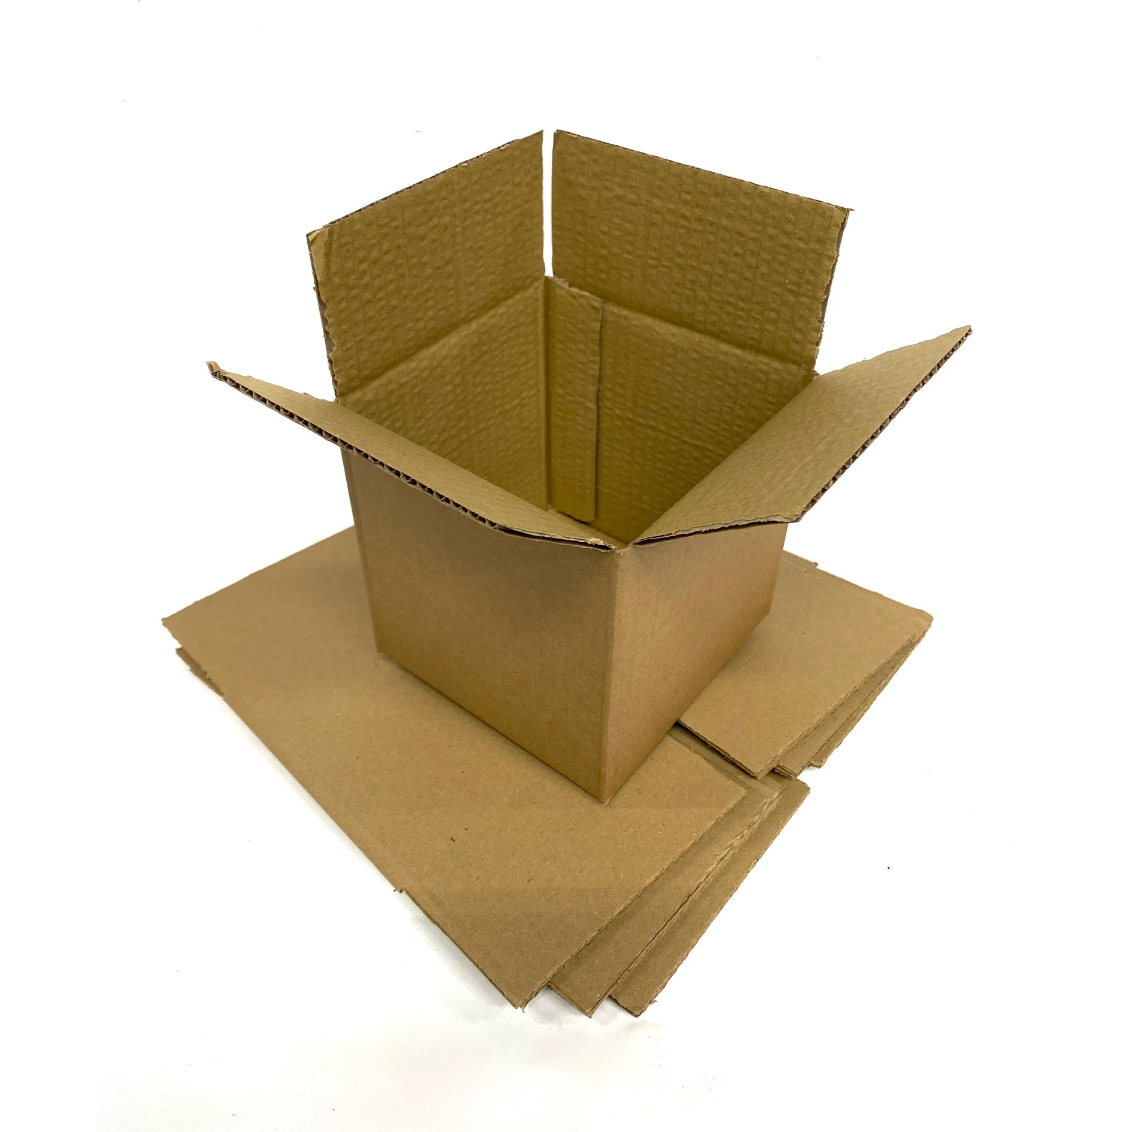 100 x New Plain Single Wall Box      4 x 4 x 8"            £19.99 - High Quality Recycled Once-Used Cardboard Boxes online - Black Country Boxes